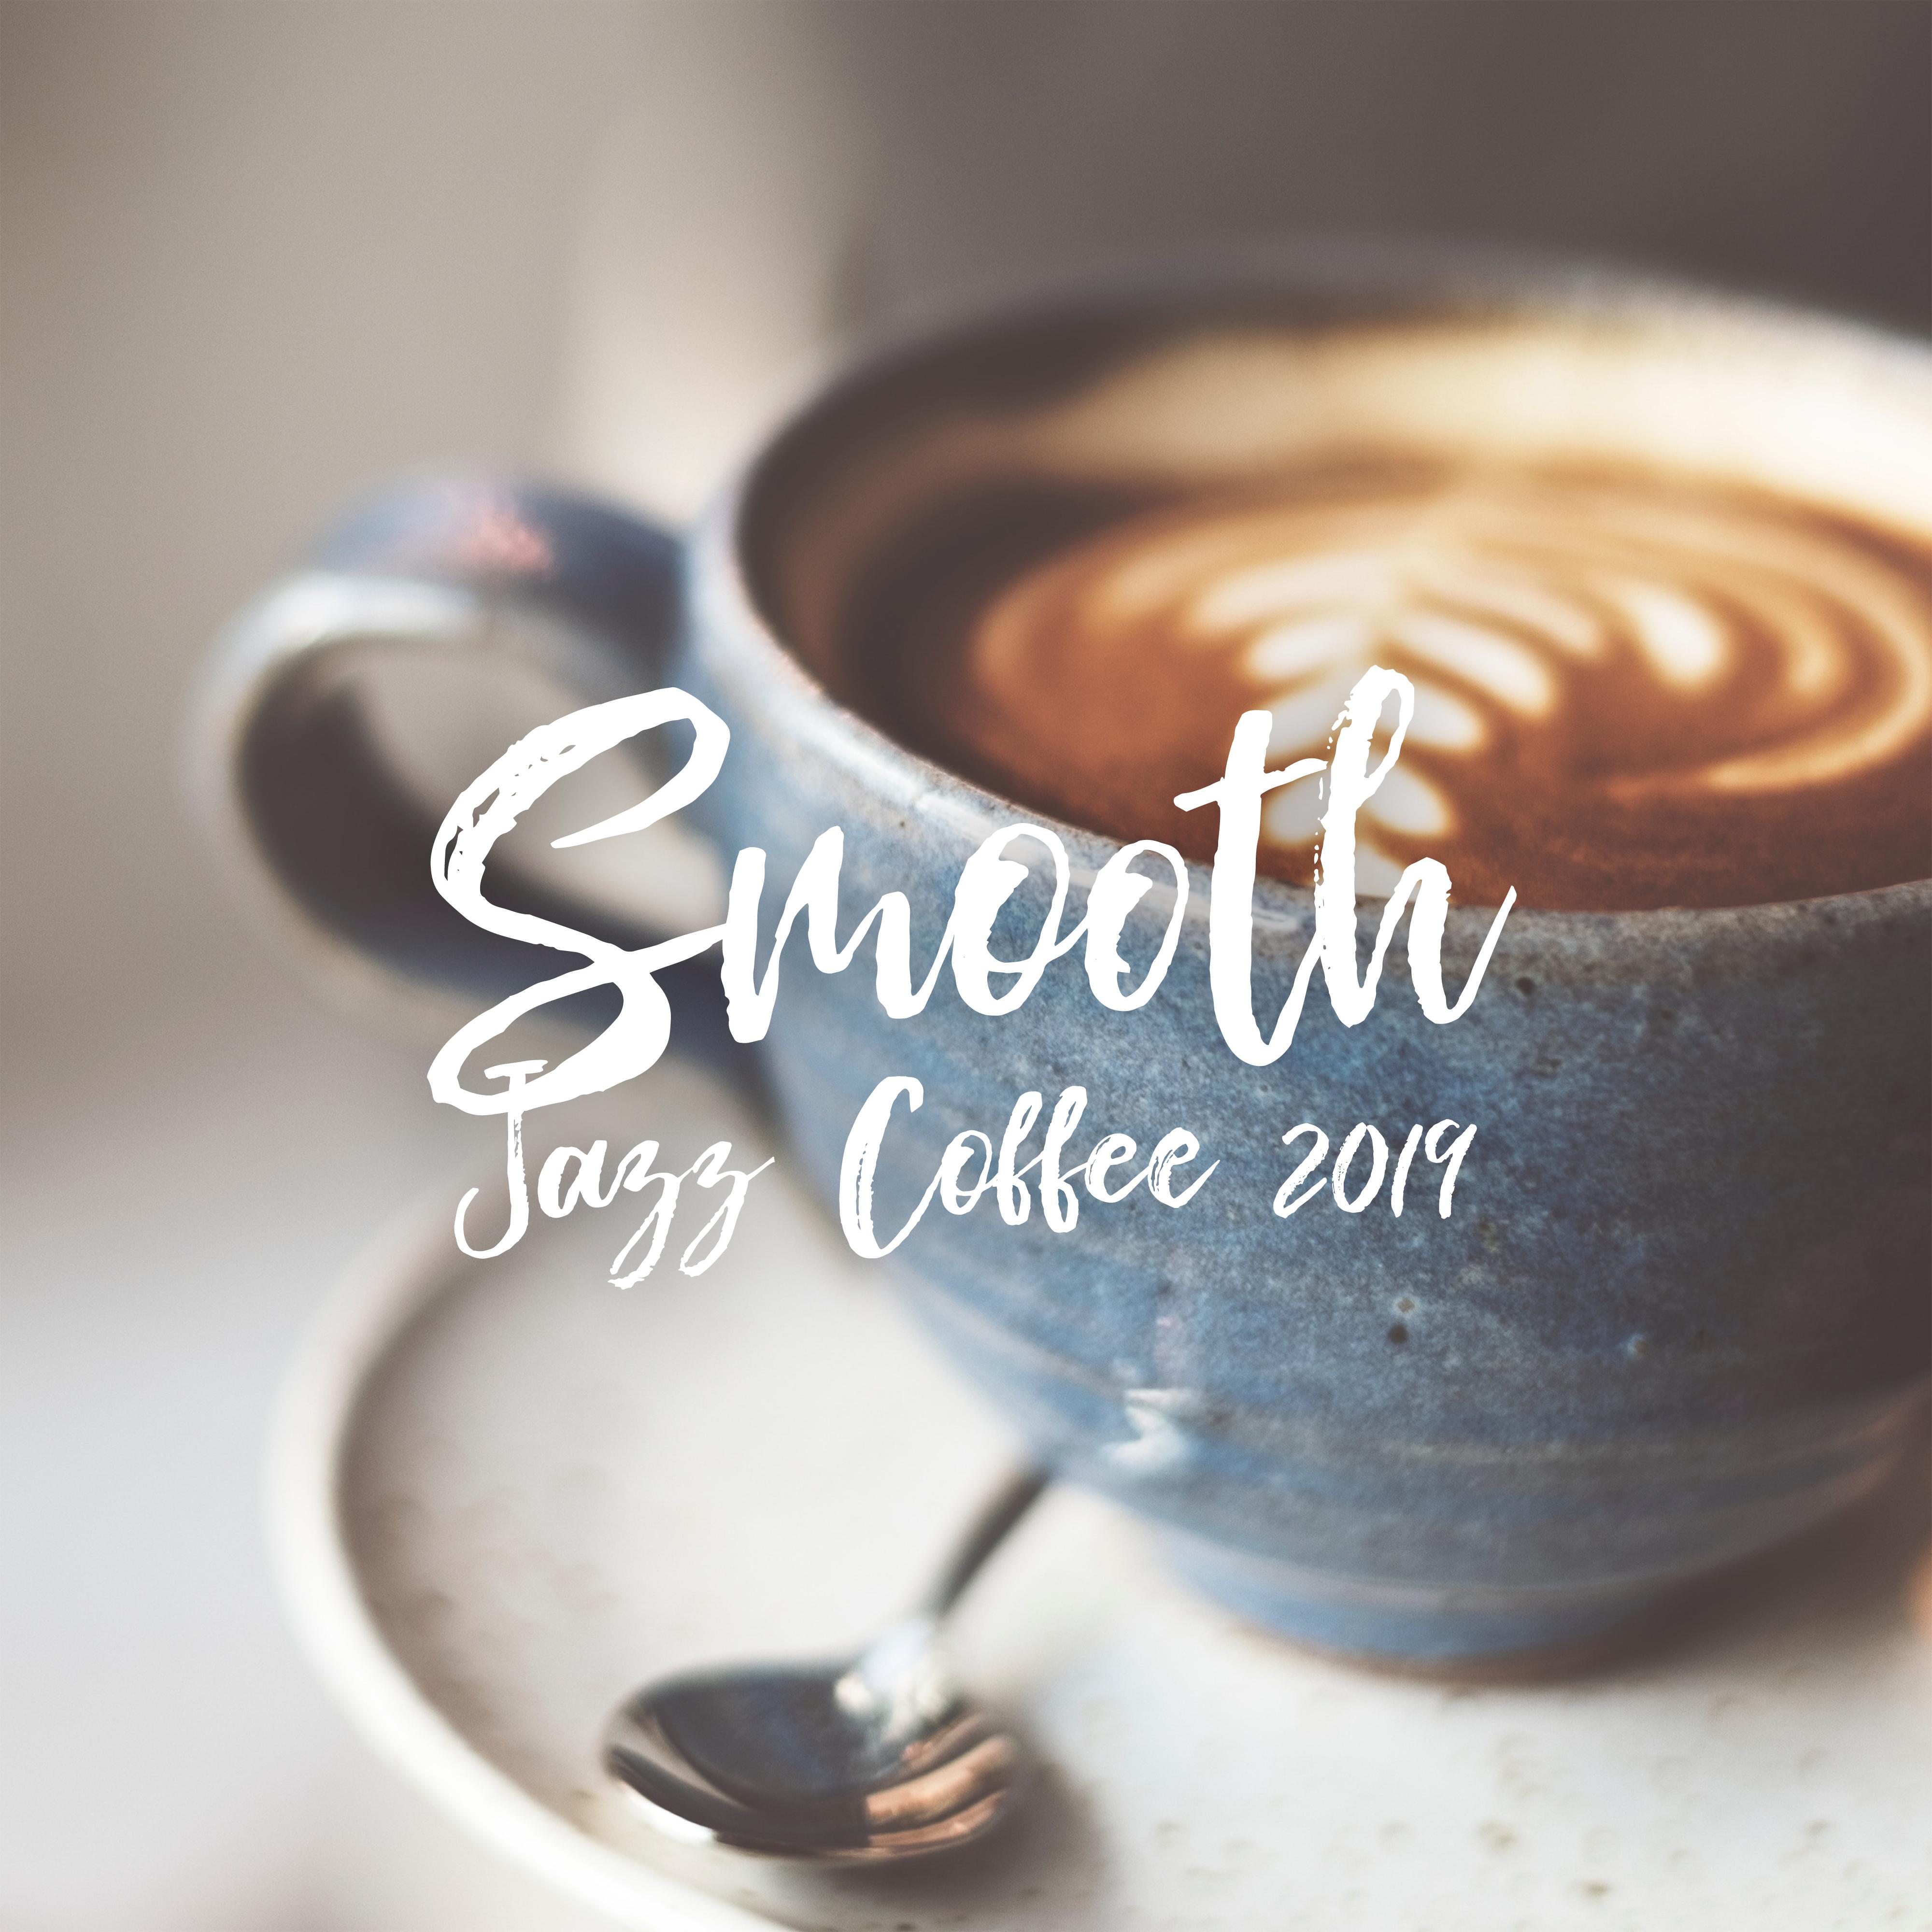 Smooth Jazz Coffee 2019 - Instrumental Jazz Music Ambient, Relaxing Jazz for Restaurant, Pure Relaxation, Coffee, Lounge Vibes, Smooth Jazz 2019